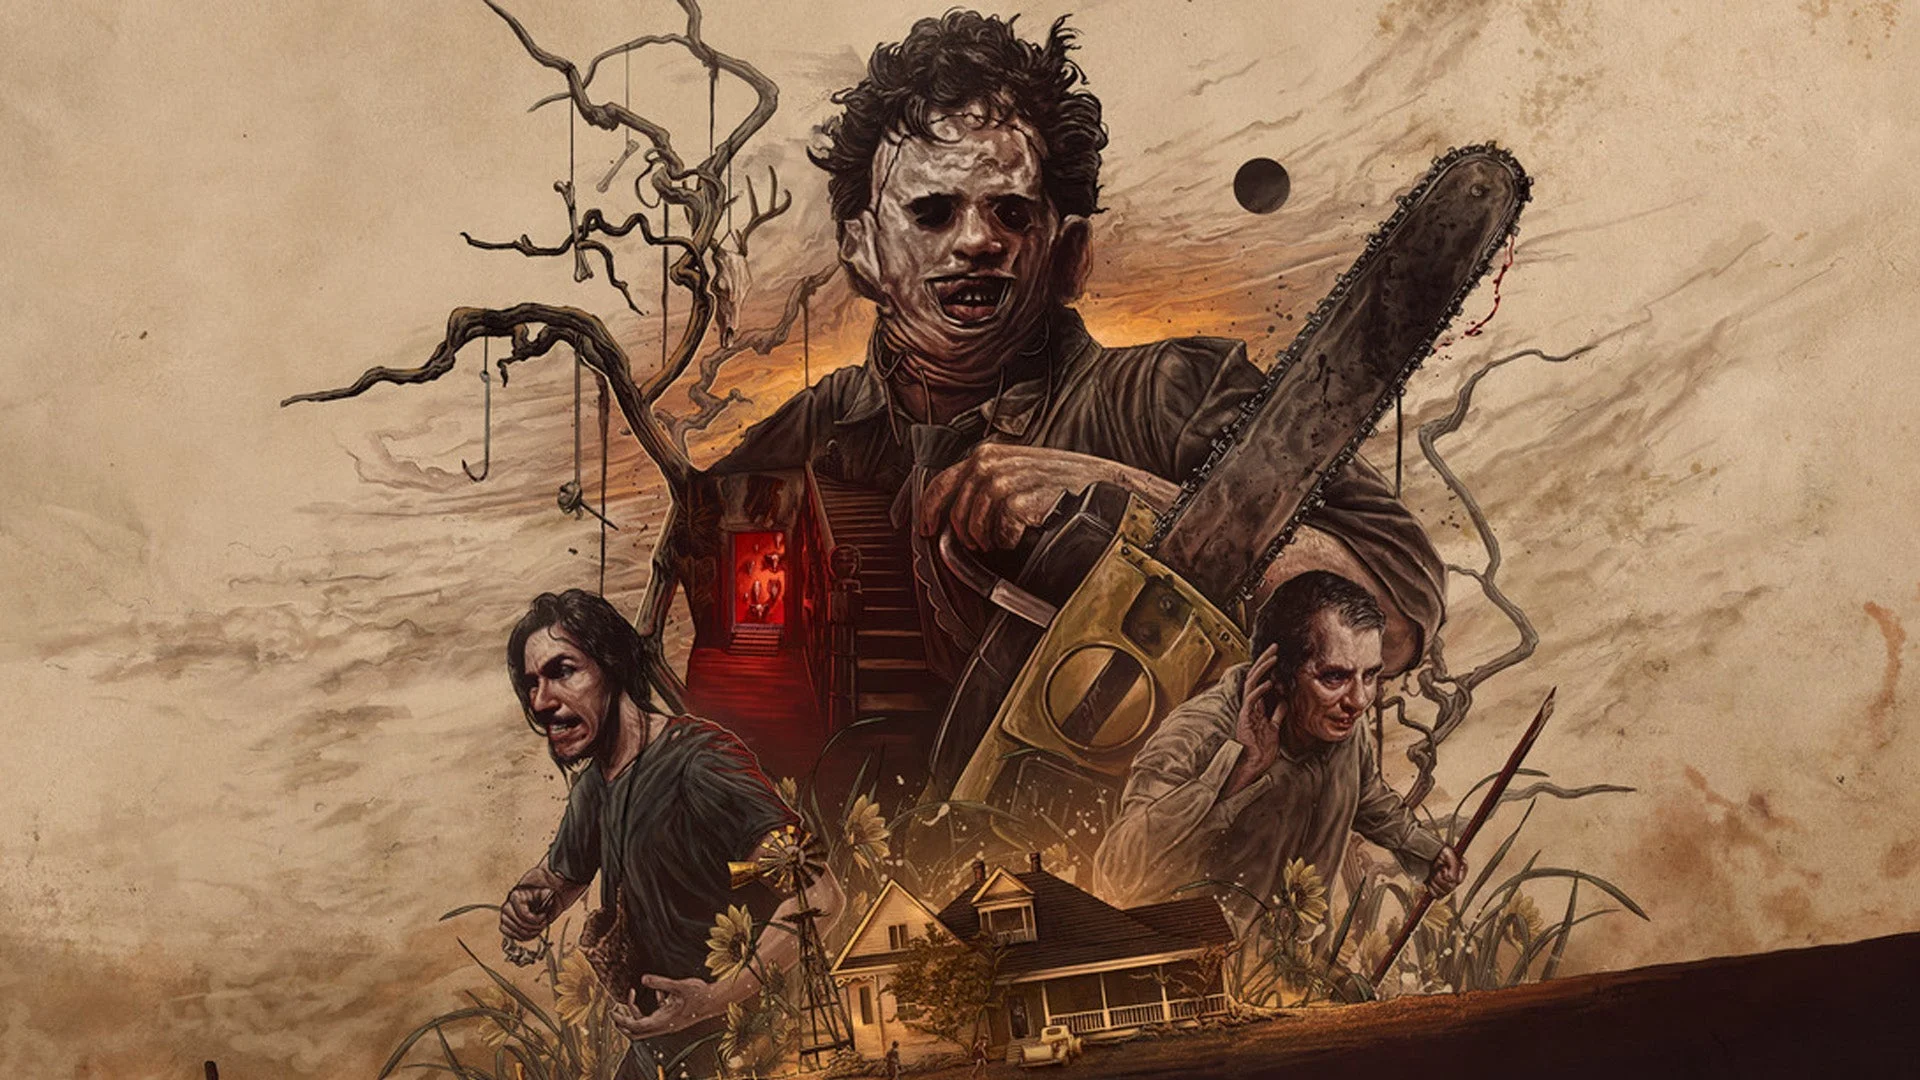 The release trailer for the Texas Chainsaw Massacre game has been released